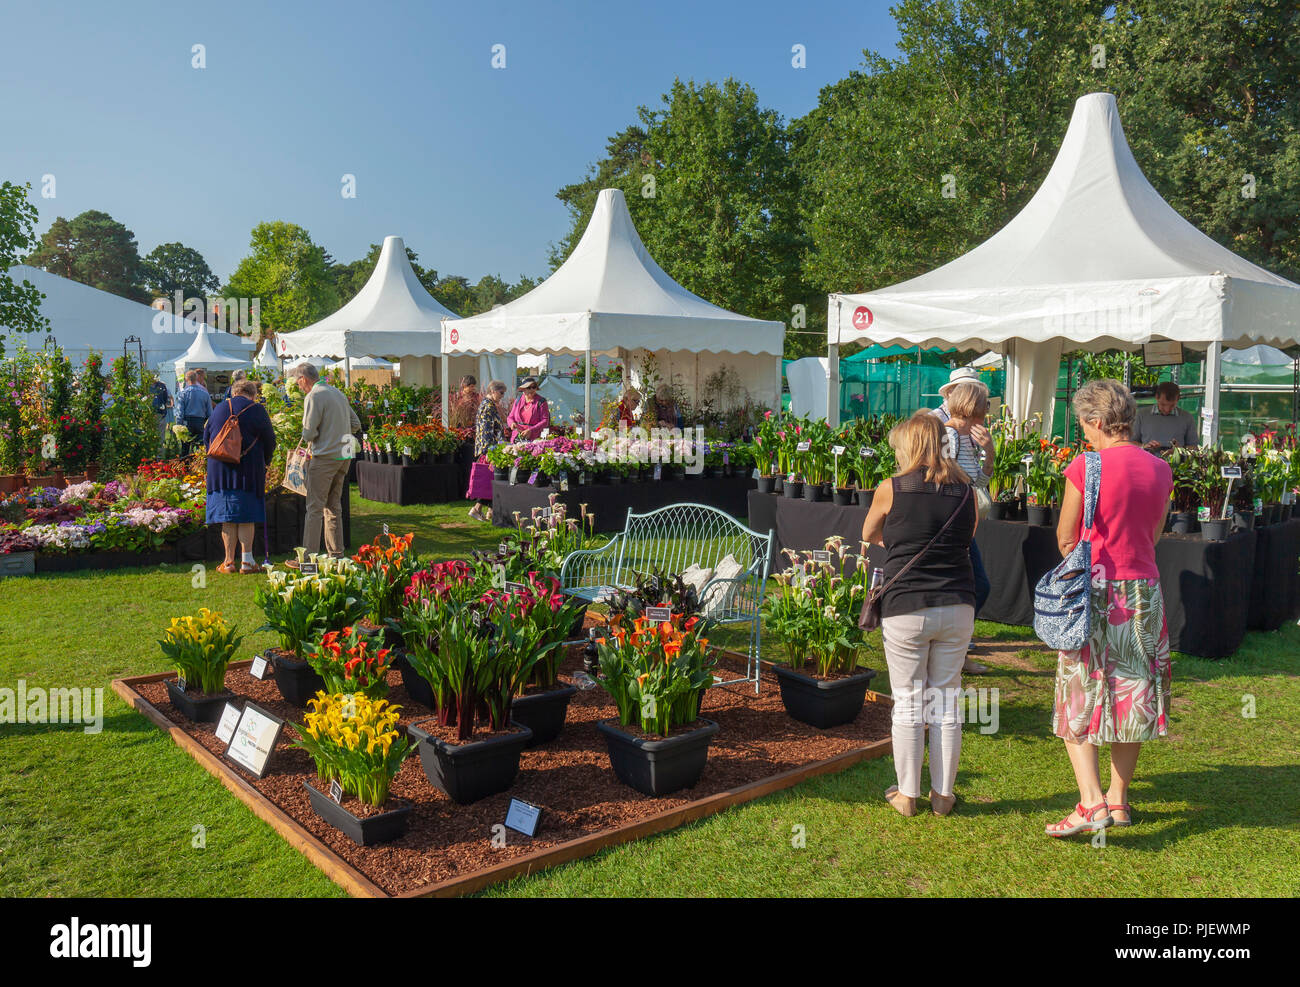 Market Stall Gazebo High Resolution Stock Photography and Images - Alamy